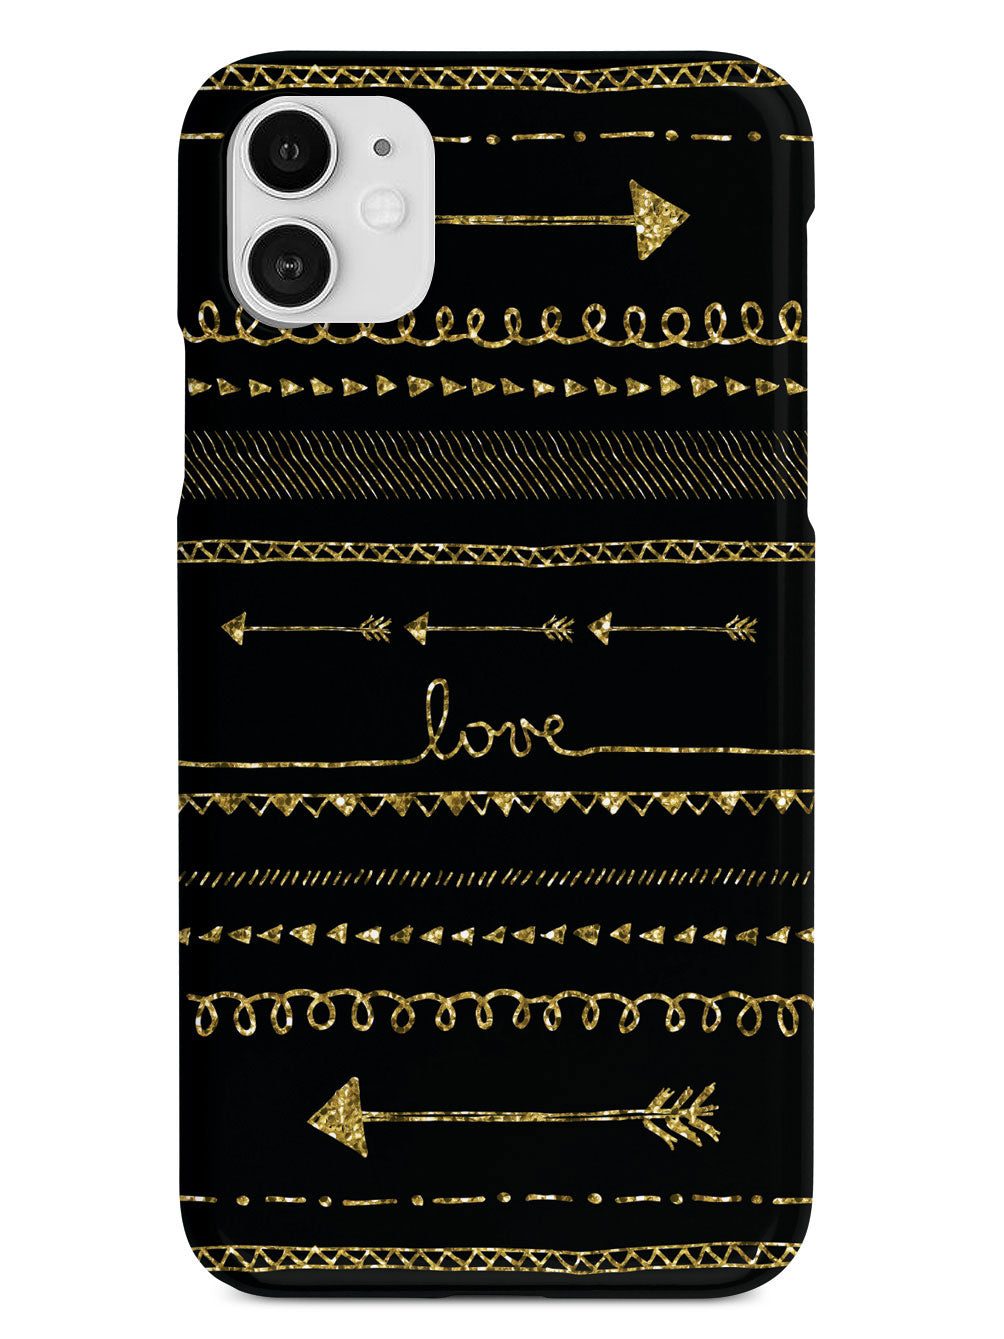 Gold Glitter Hand Drawn Doodle Arrows Case